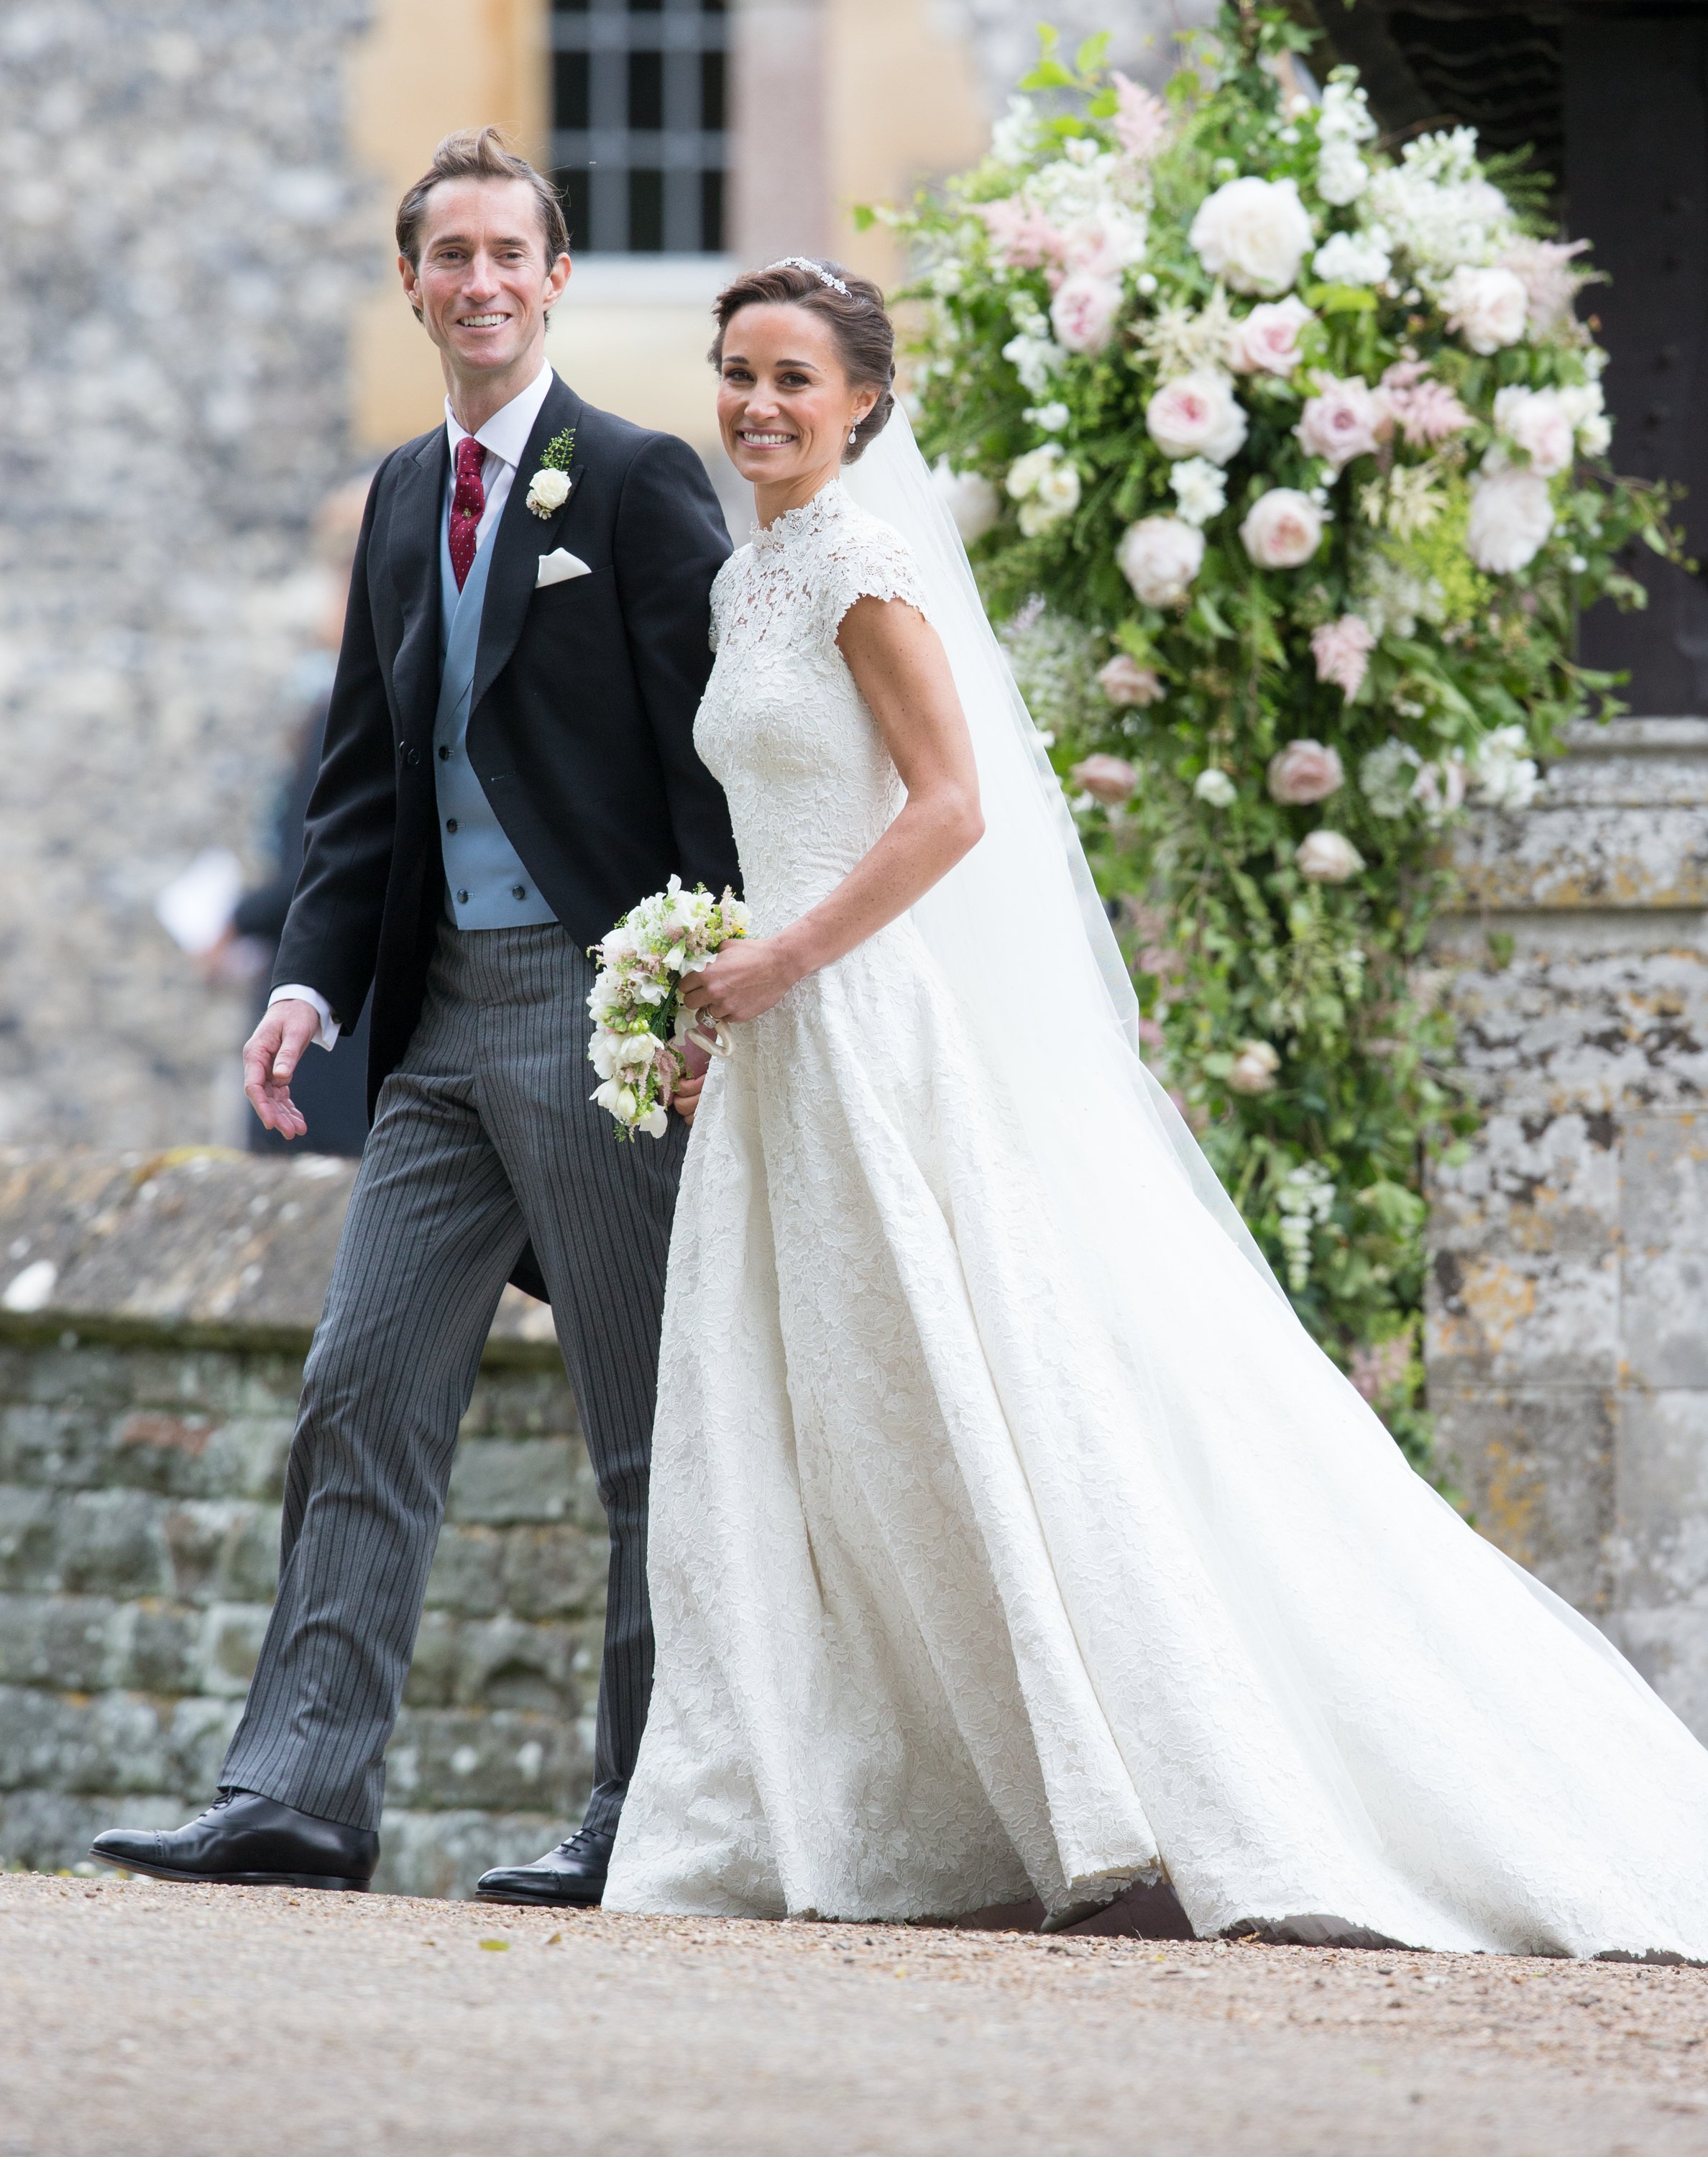 Pippa Middleton and James Matthews pictured leaving after getting married at St Mark's Church on May 20, 2017 in Englefield Green, England ┃Source: Getty Images